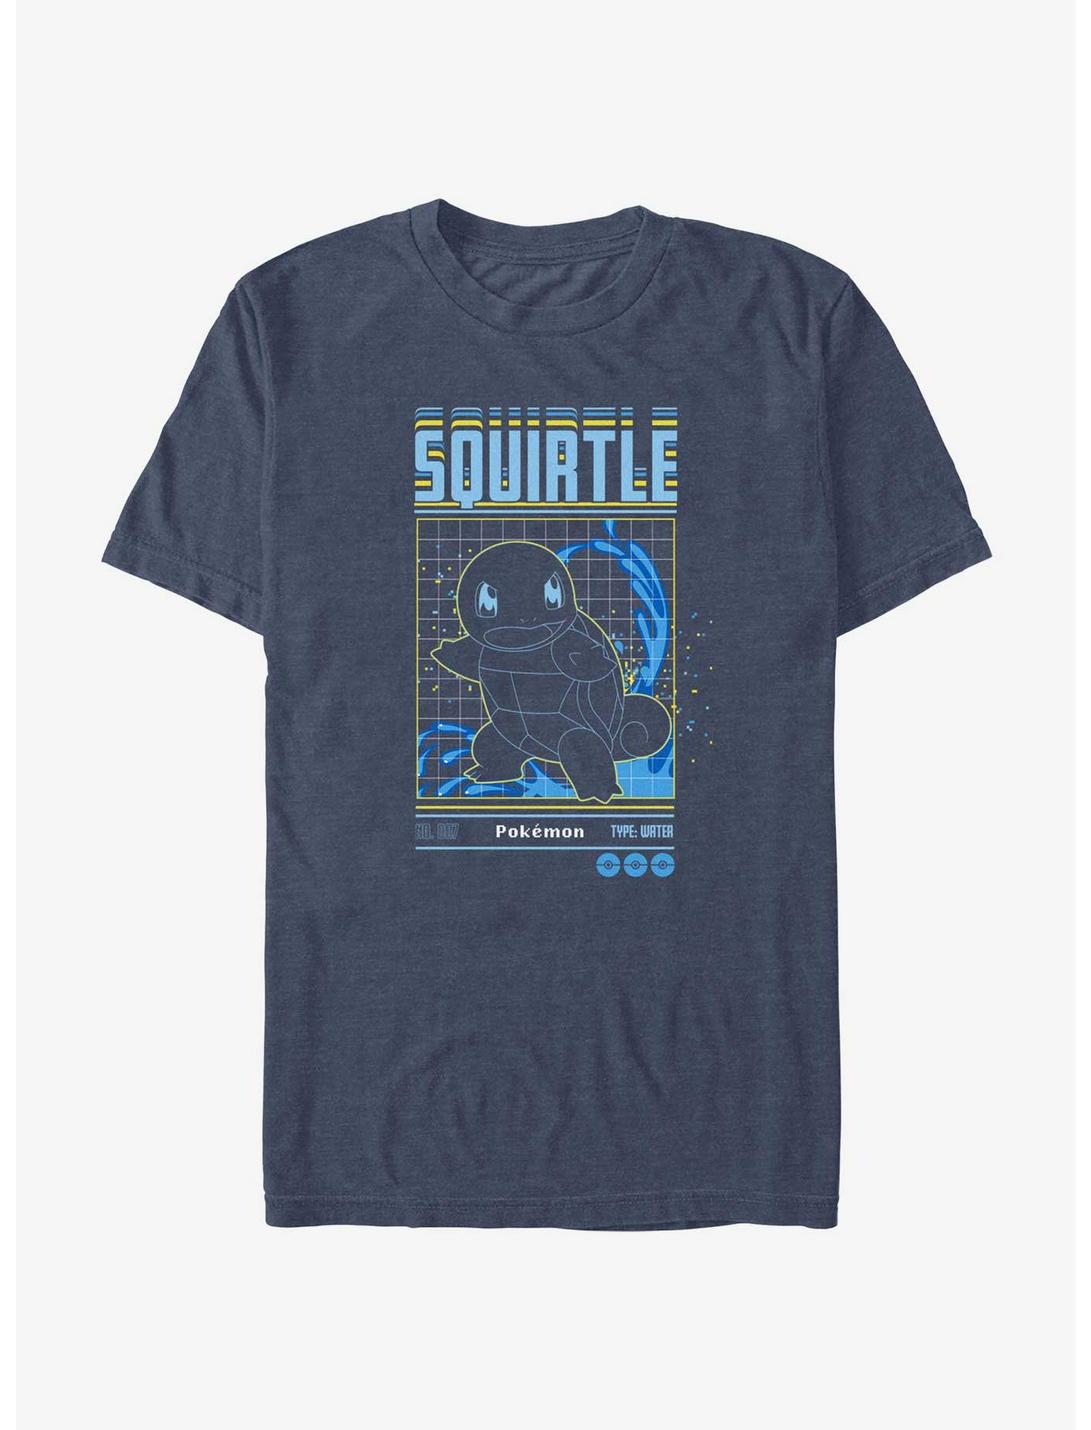 Pokemon Squirtle Grid T-Shirt, NAVY HTR, hi-res